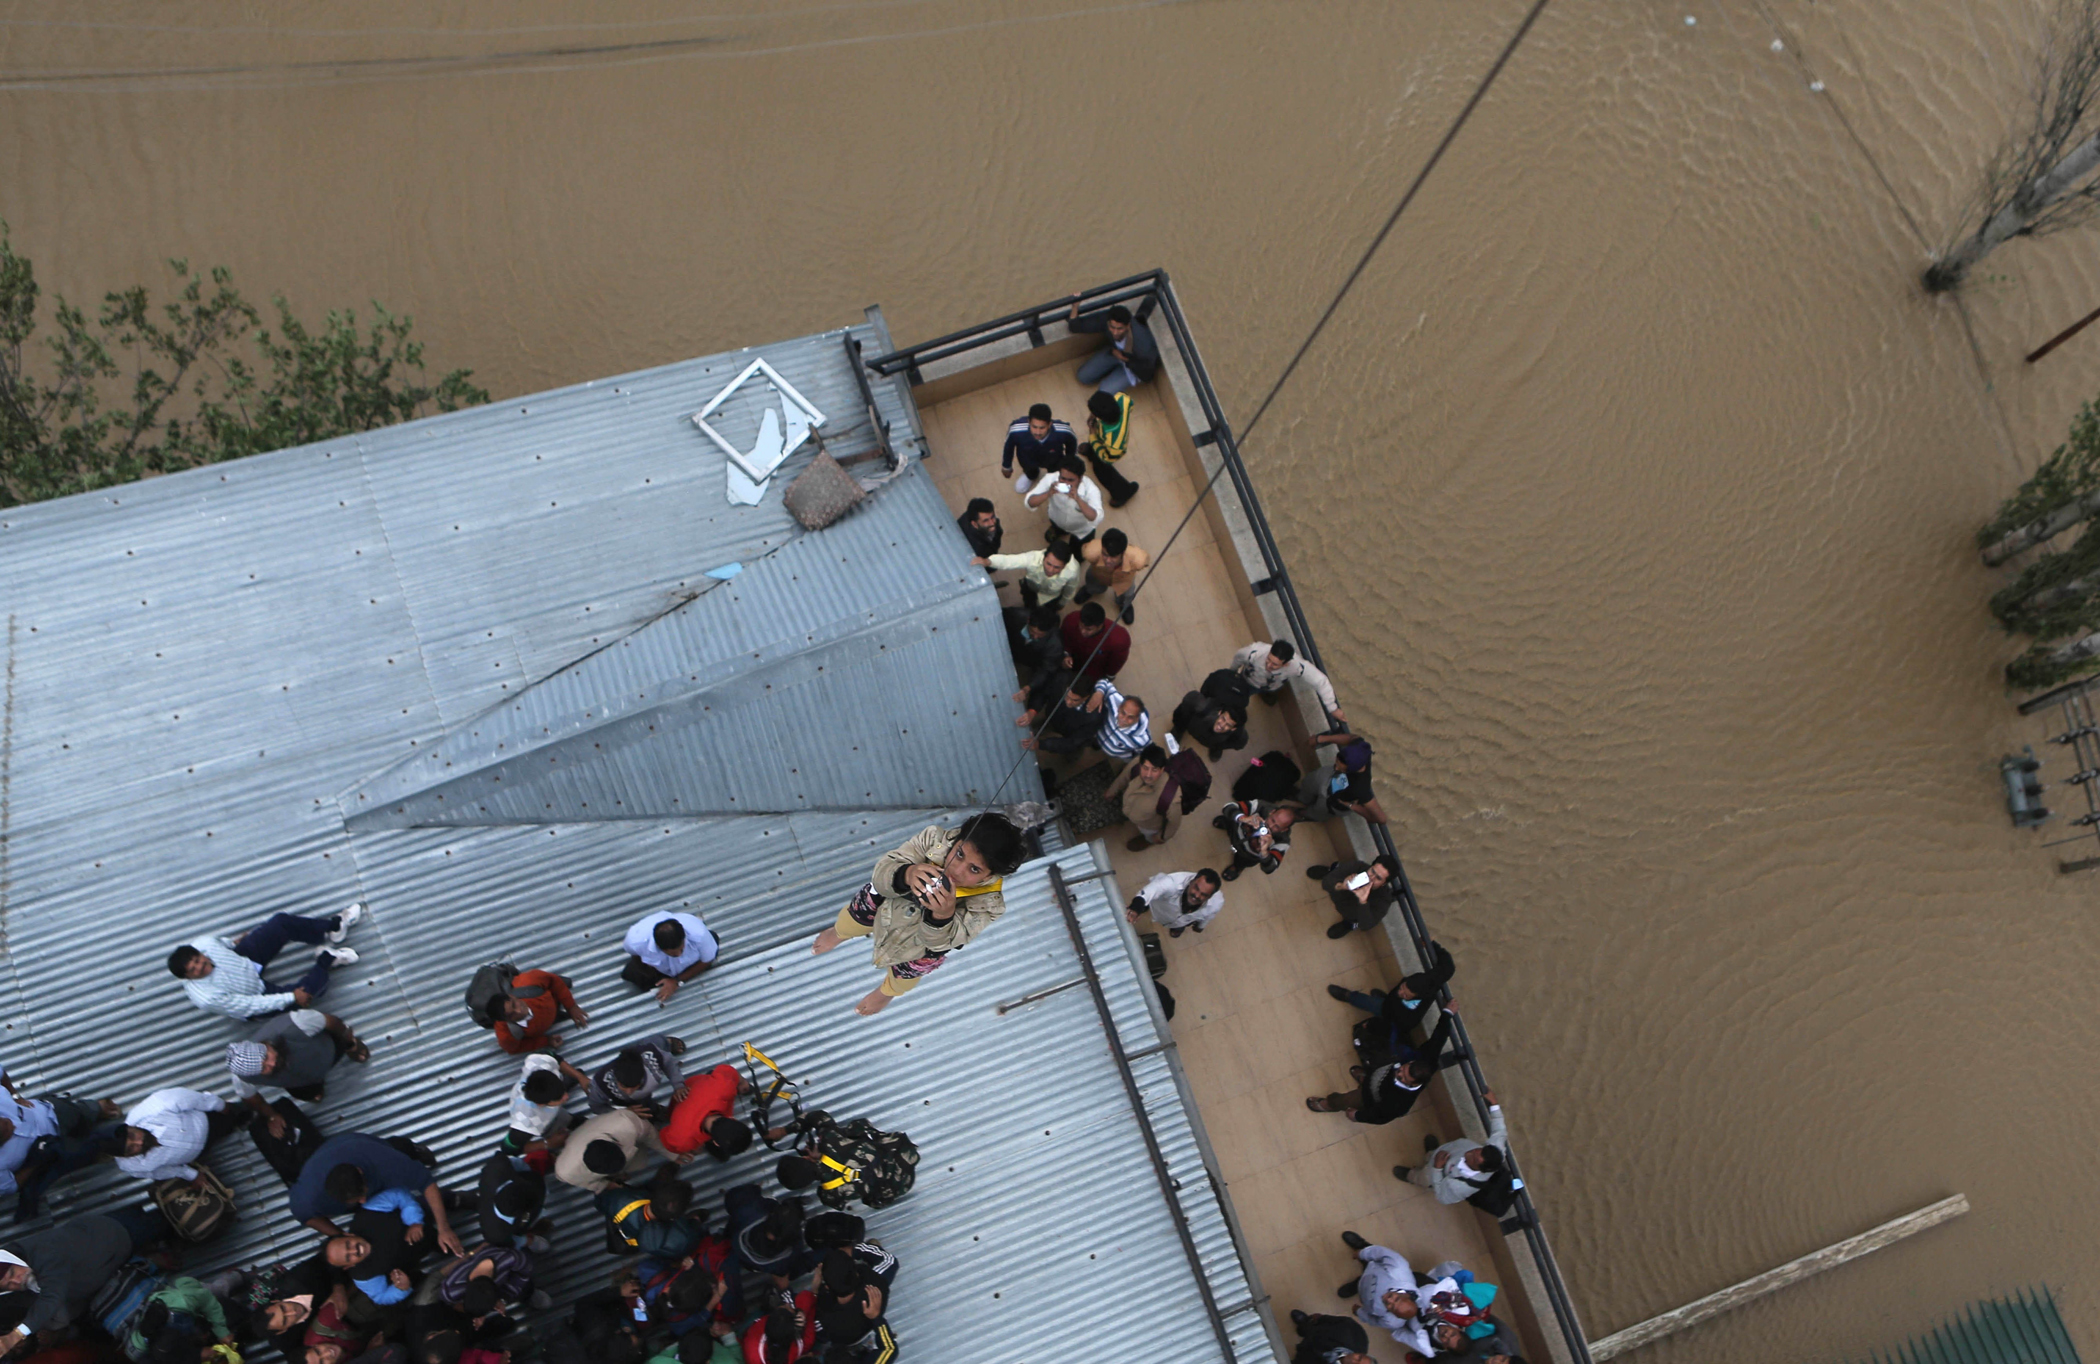 A Kashmiri woman is airlifted from the roof of a of a five-story hotel, four of which are submerged in floodwaters, in Srinagar, India, Sept. 9, 2014.